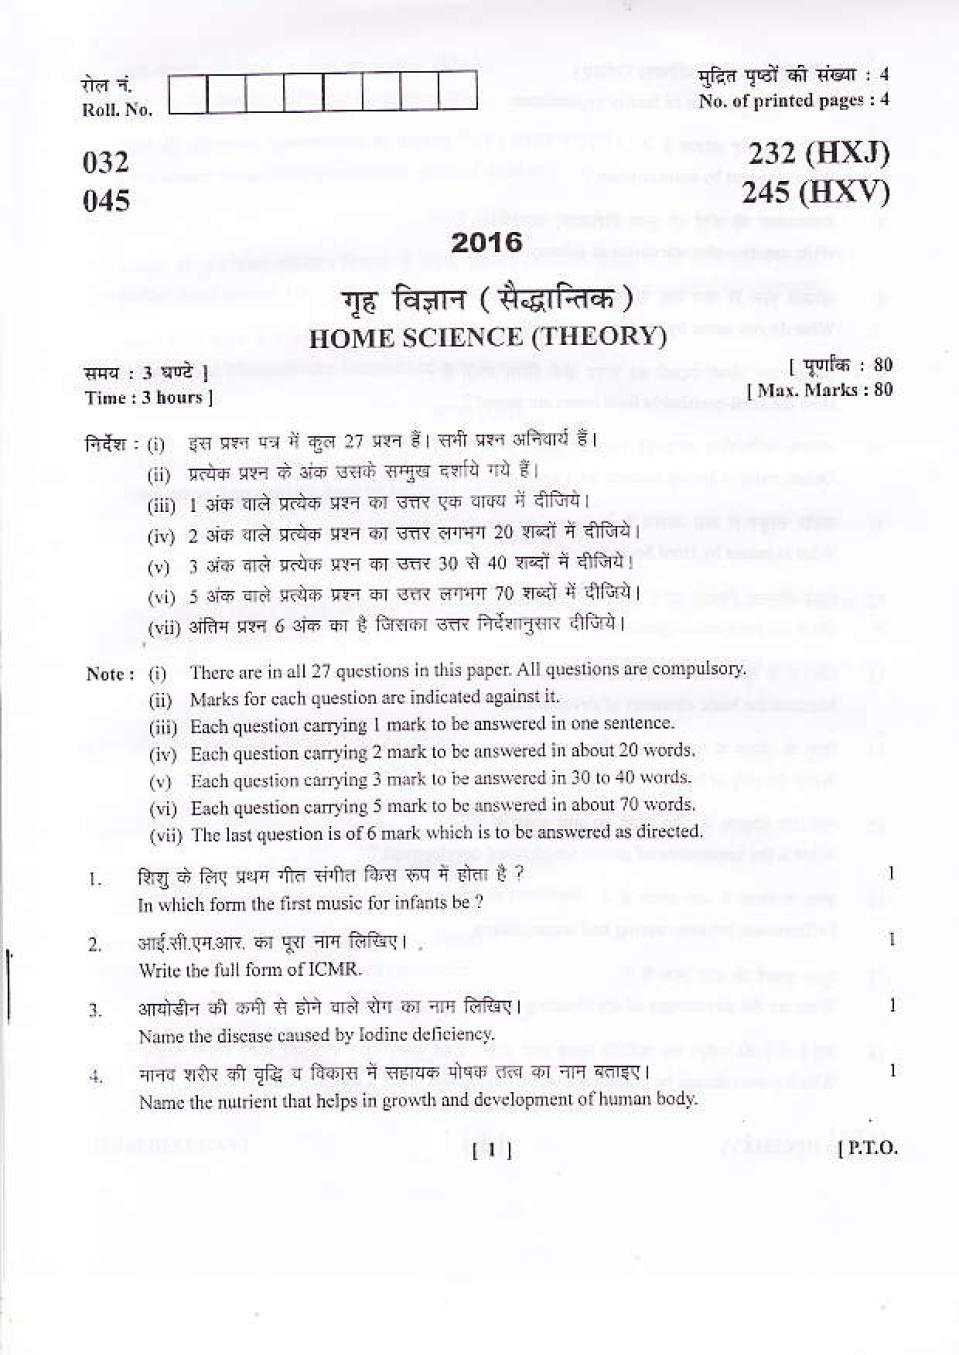 Uttarakhand Board Class 10 Question Paper 2016 for Home Science - Page 1